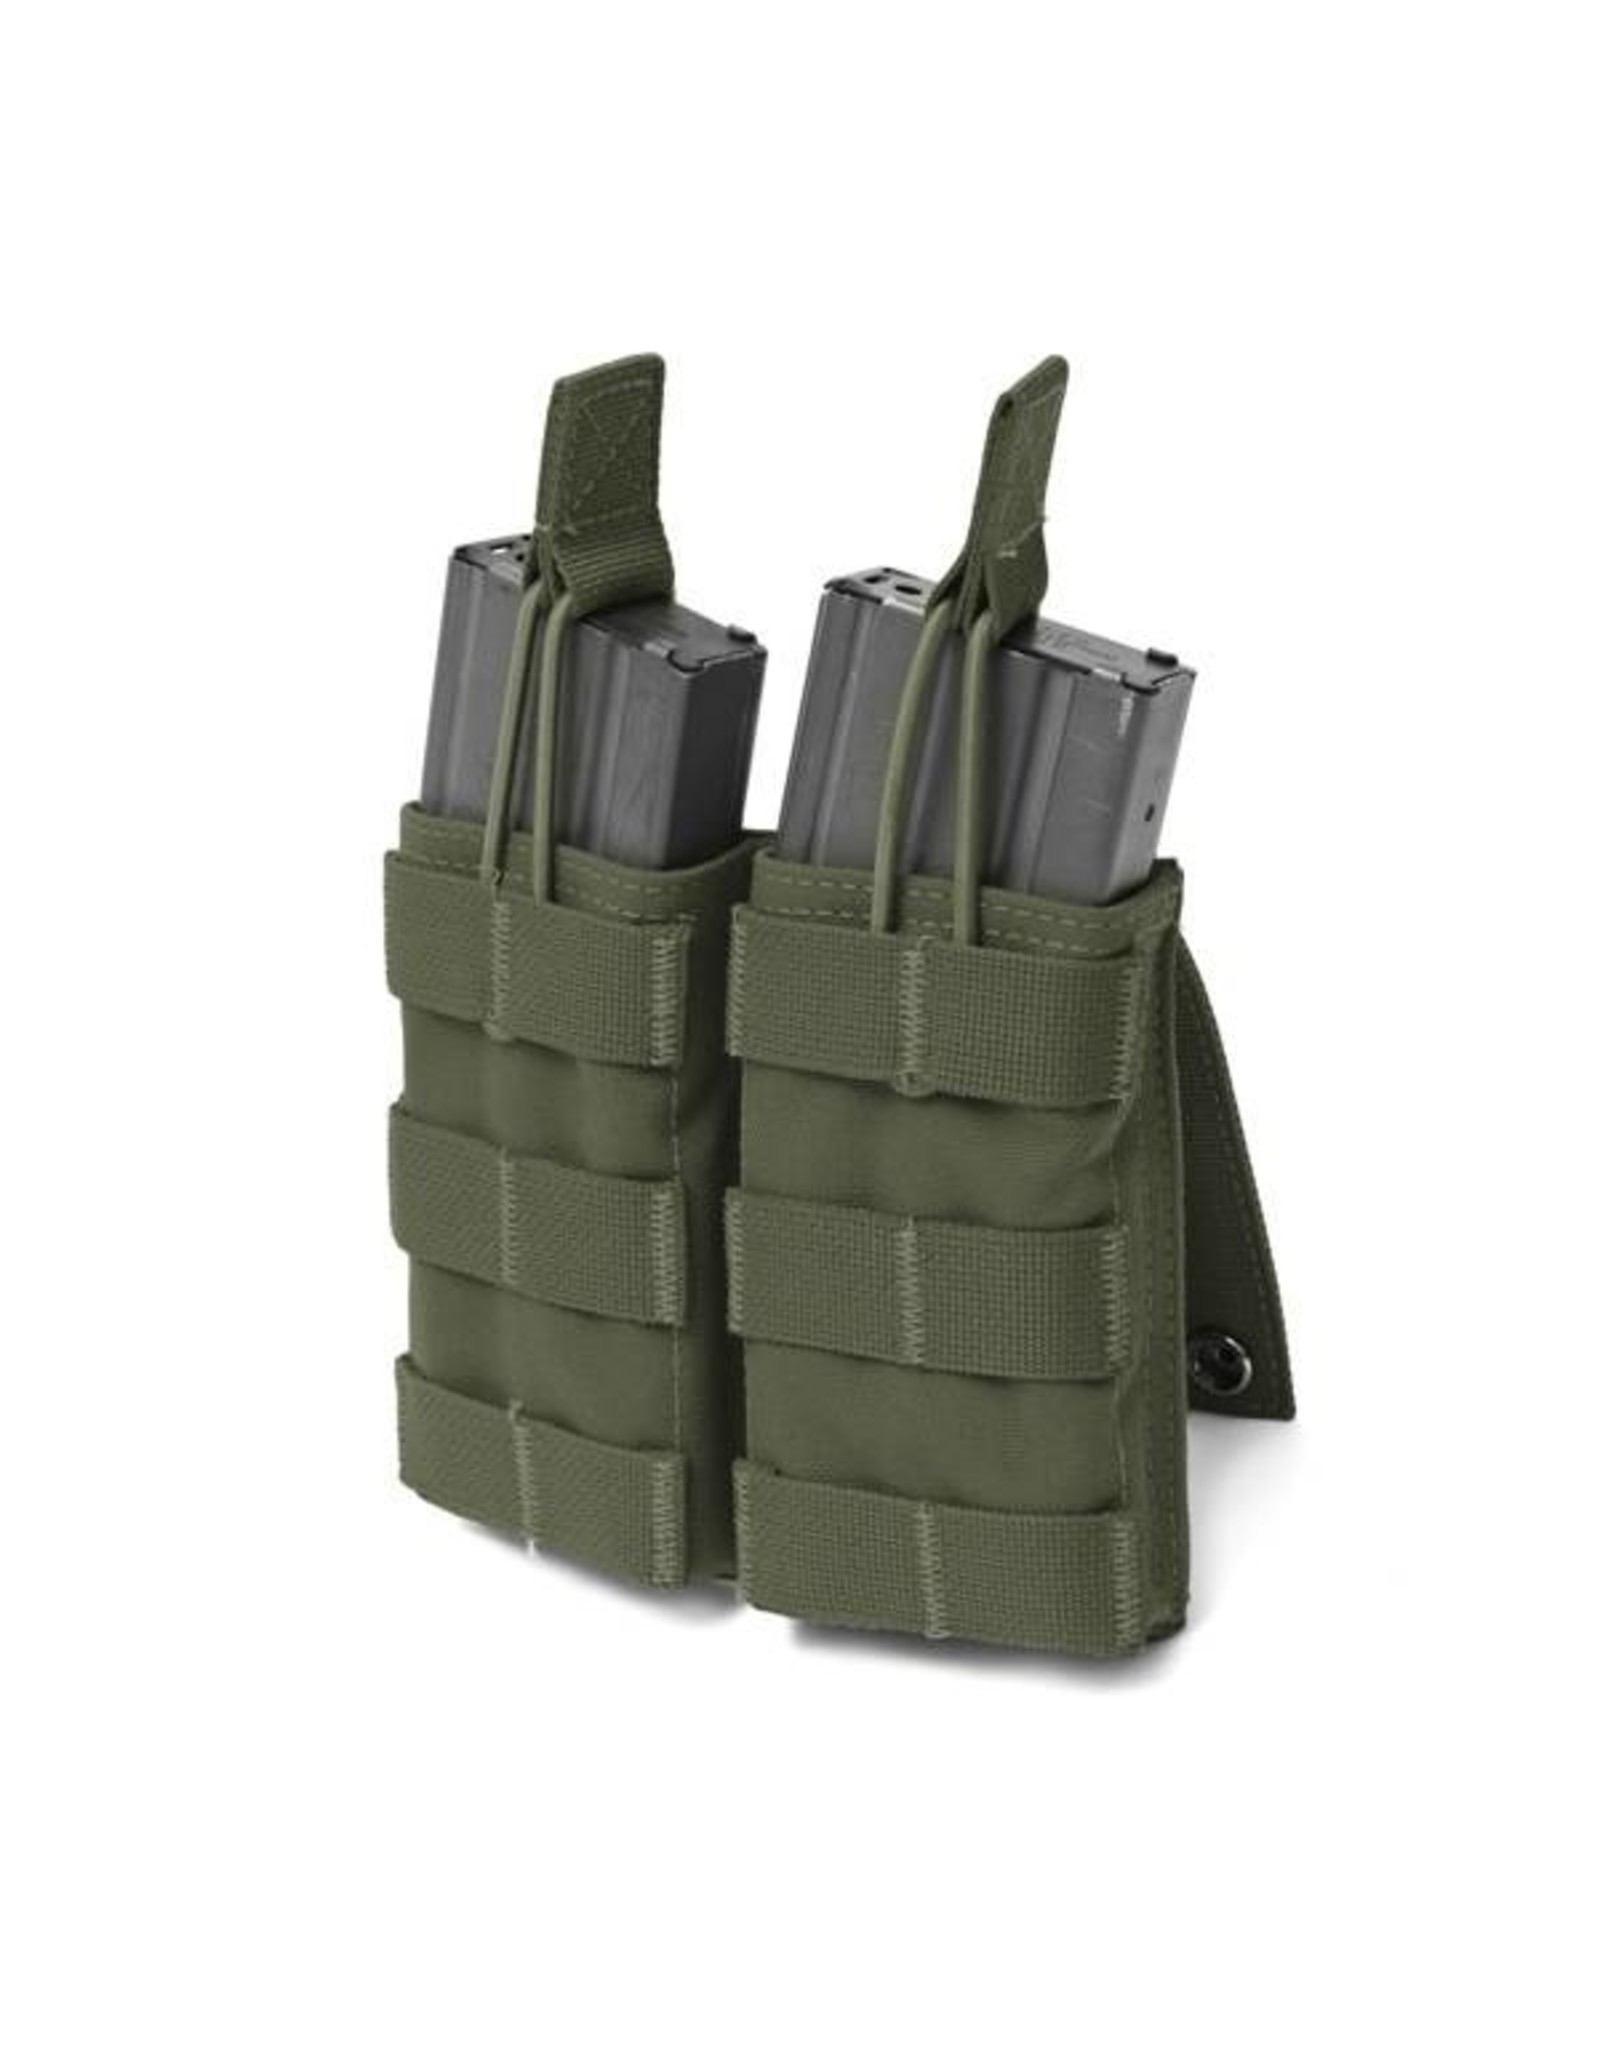 Warrior Double Open 5.56 Mag Bungee Retention - Olive Drab